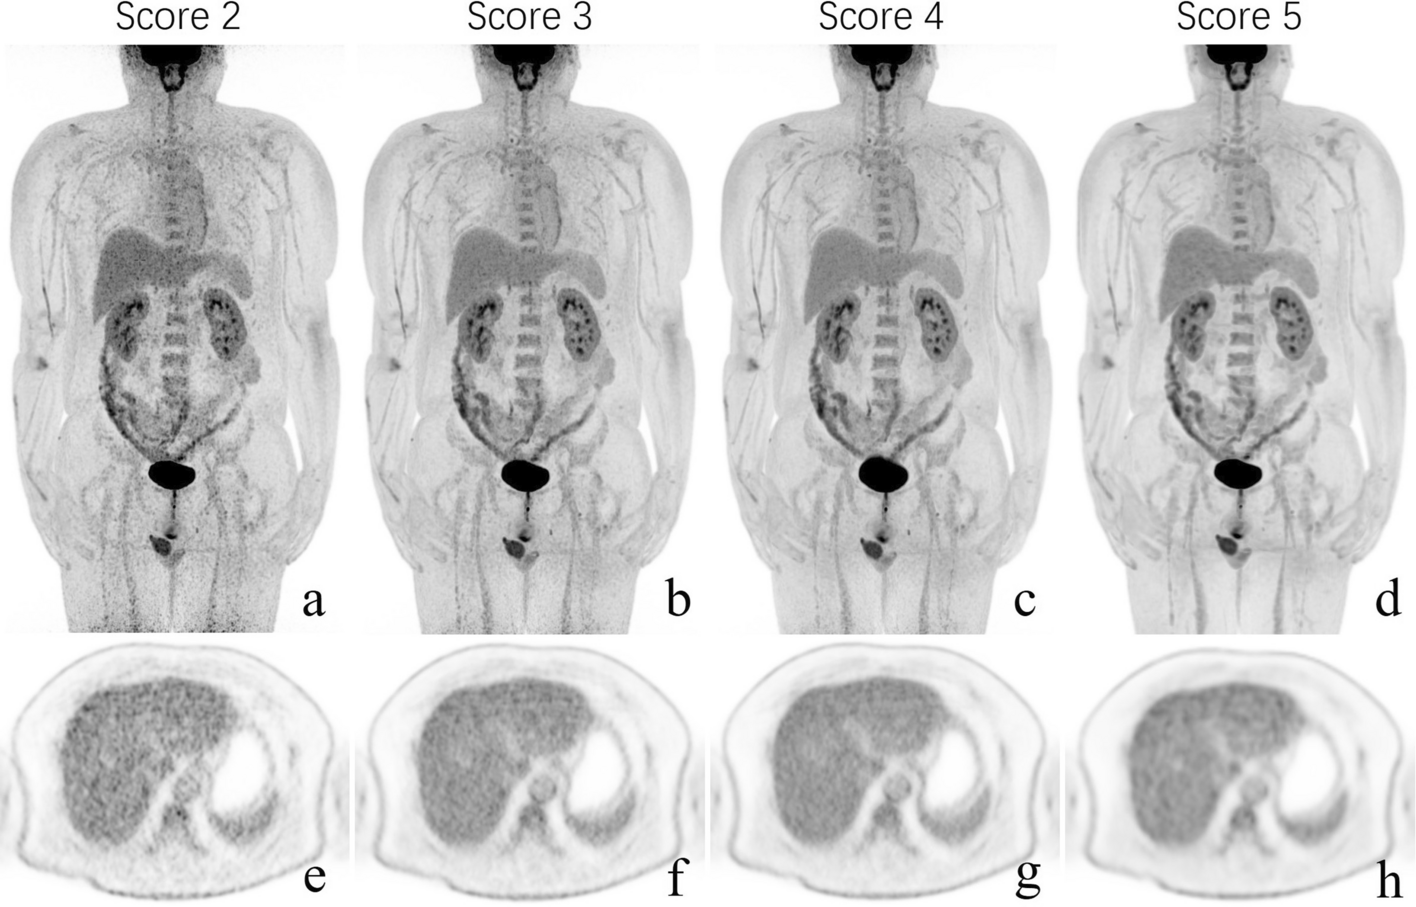 Phantom study and clinical application of total-body 18F-FDG PET/CT imaging: How to use small voxel imaging better?